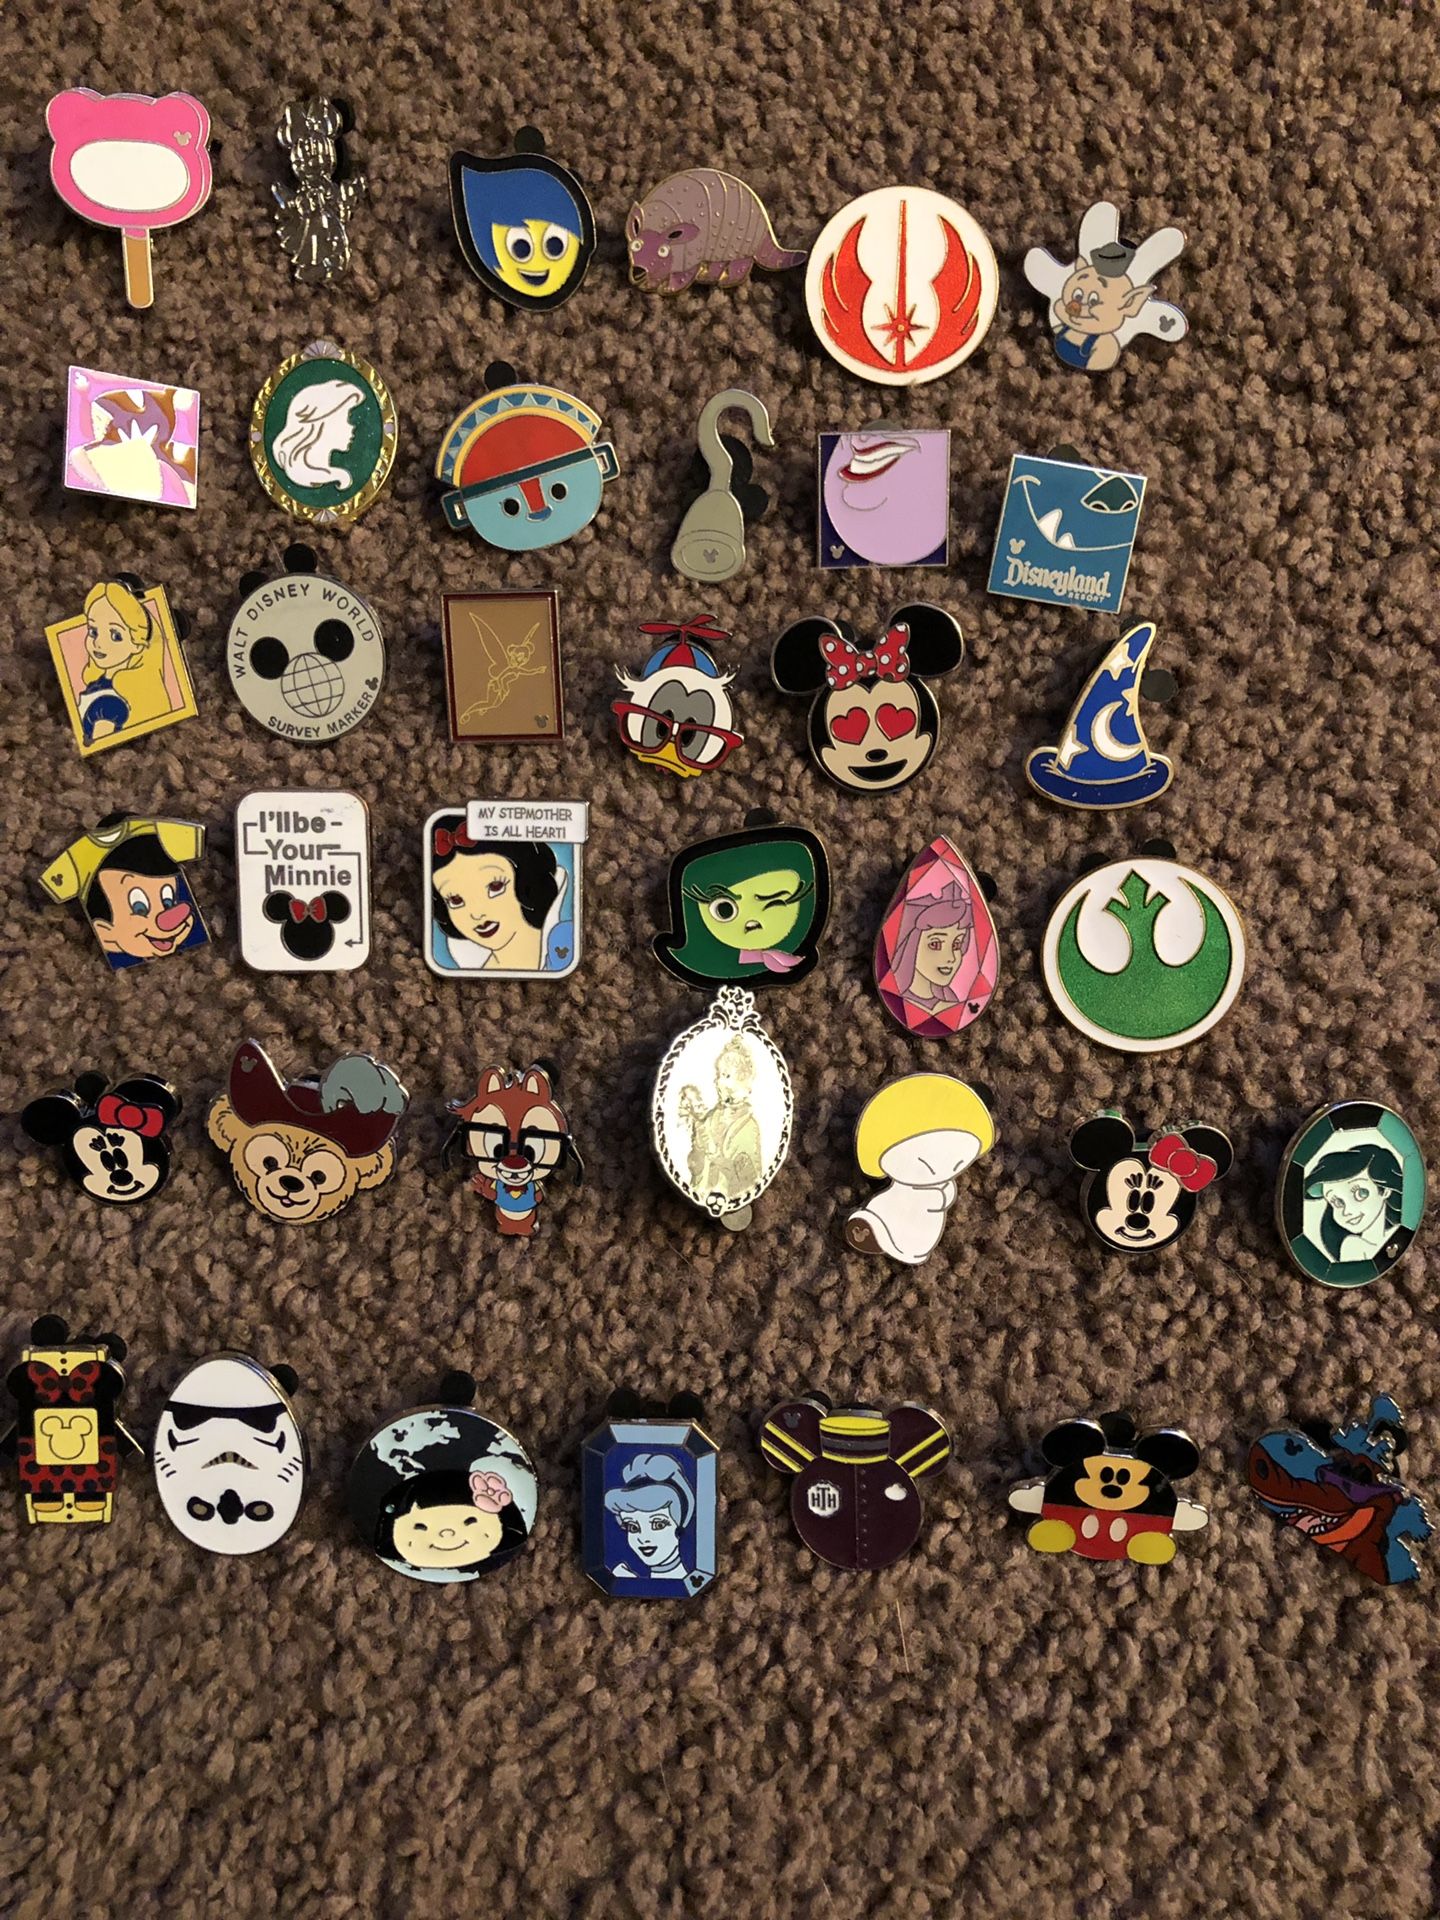 Disney character Disney pins. All of them were traded at Disneyland and Disneyland California by my KIDS. They are not actual collectors so I can’t